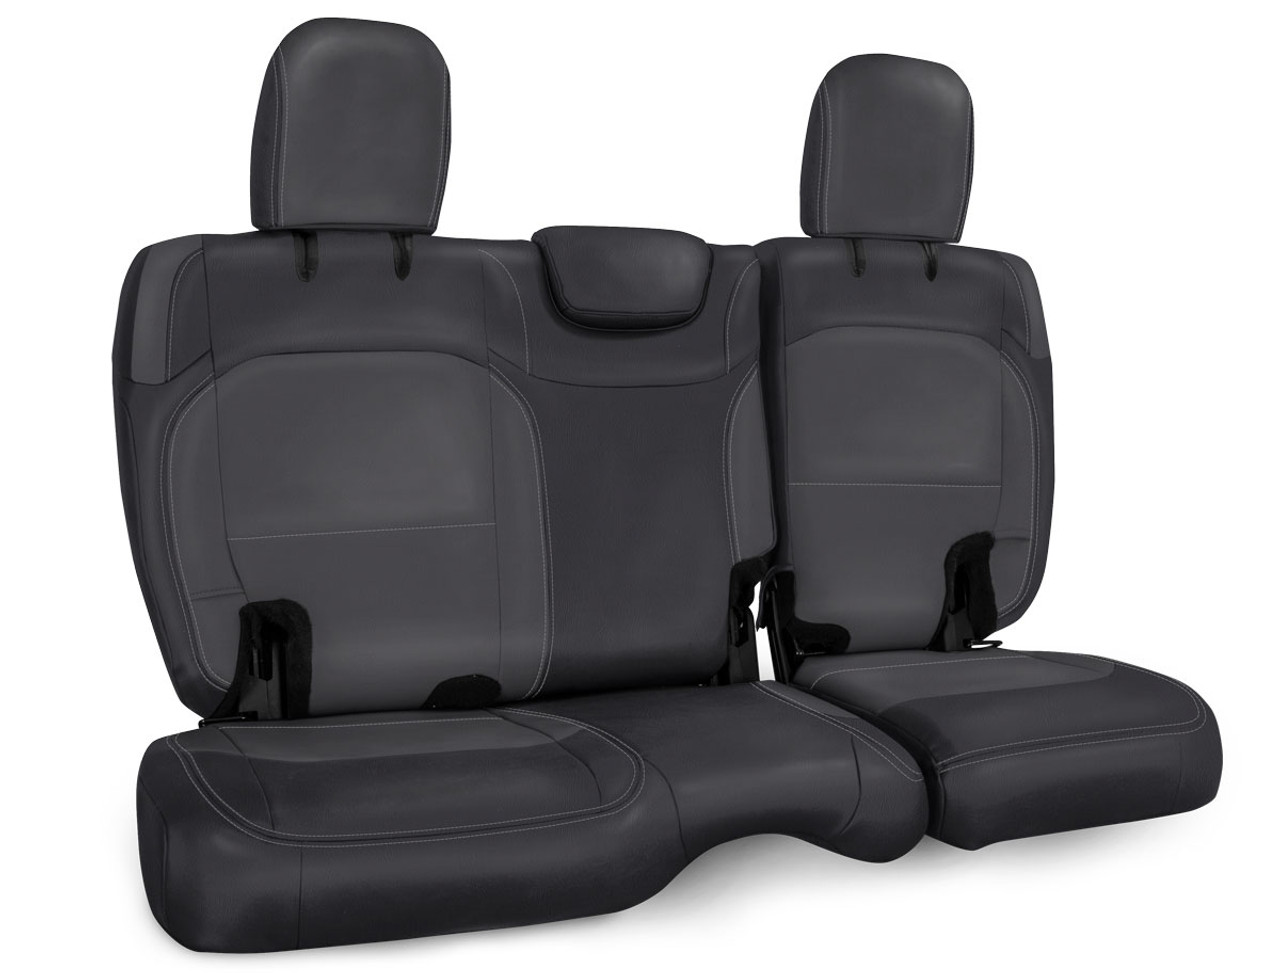 Rear Bench Cover for Jeep Wrangler JL, 2 door - Black and grey